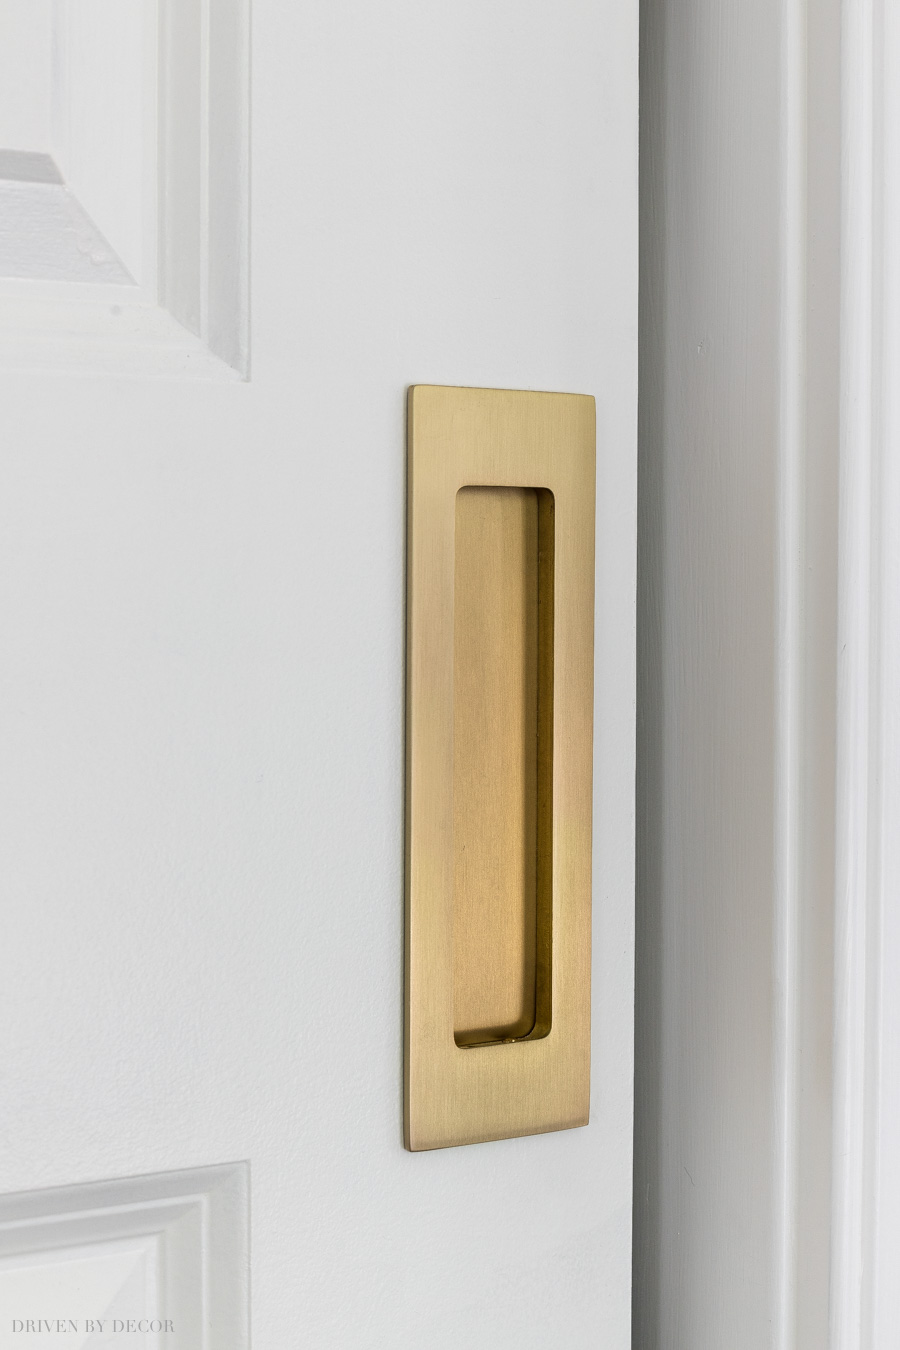 Love this pocket door upgrade! She used a rectangular satin brass pull on the door to their walk-in closet.